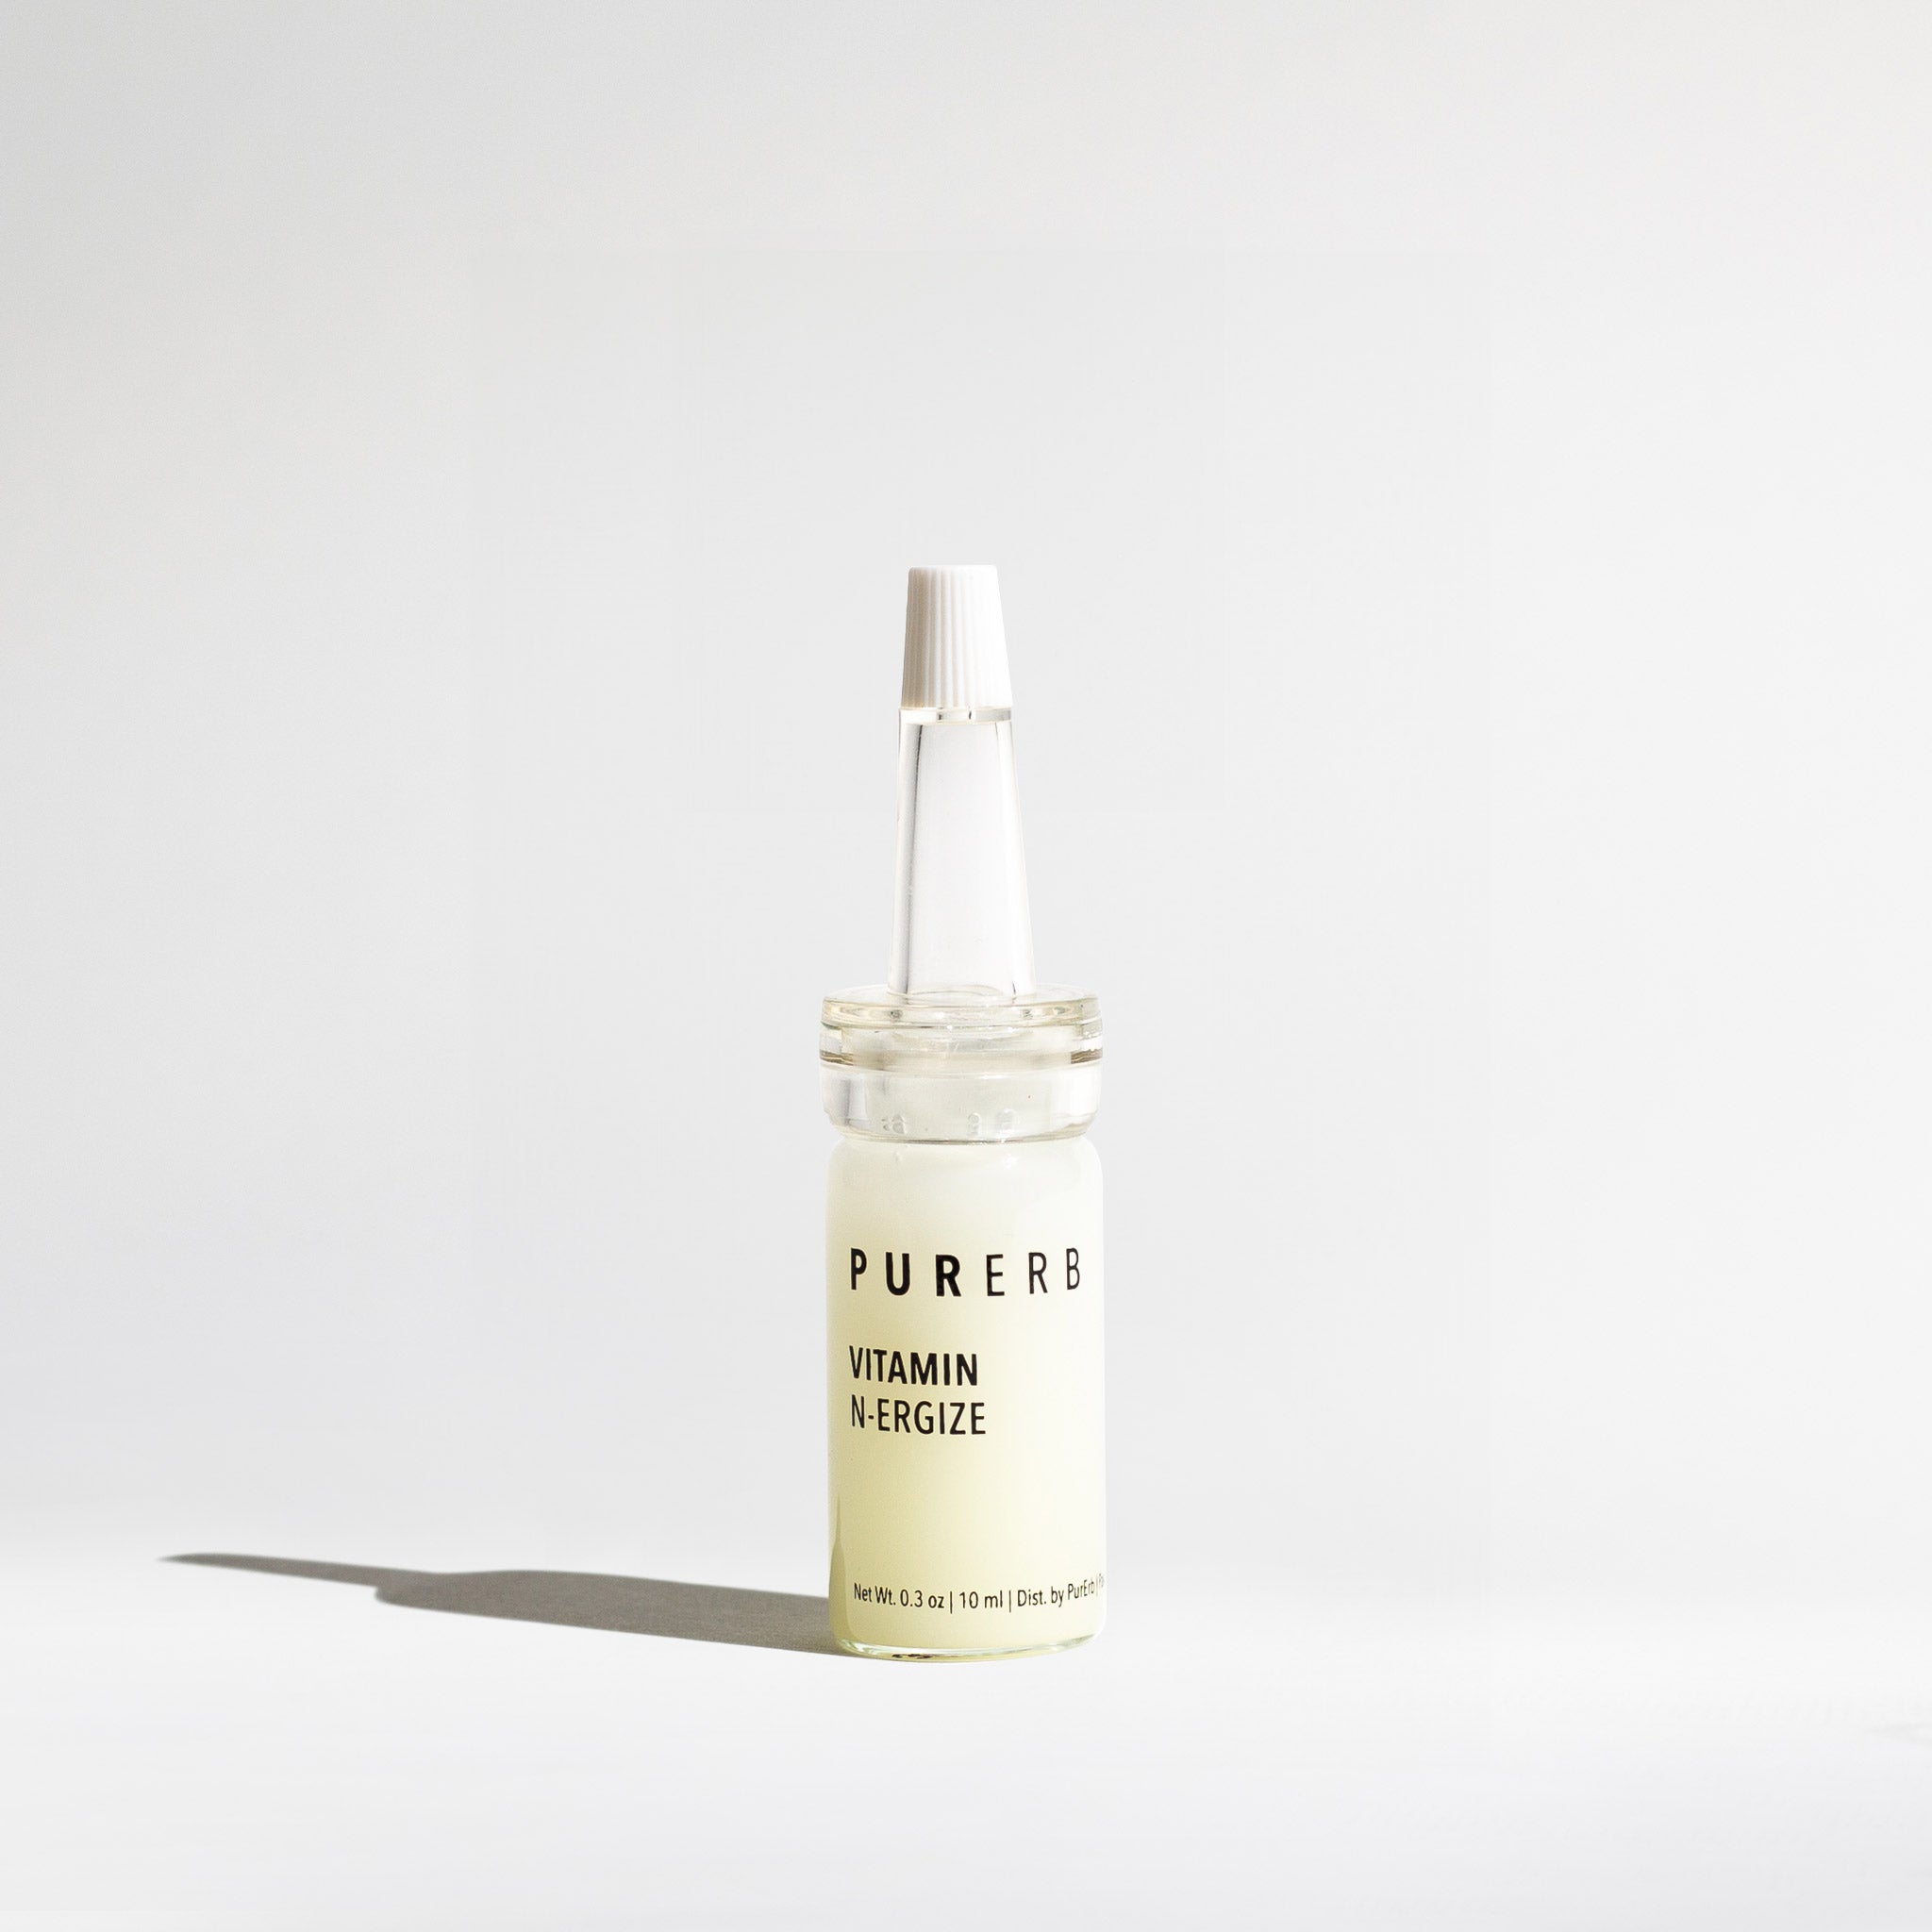 Vitamin N-Ergize - Experience the power of this skin superfood serum! Nourish, renew, and revitalize your skin with essential vitamins, peptides, and omega fatty acids. Achieve smoother and brighter skin without stickiness or tightness. Detoxify and balance oil levels with 6 essential vitamins, Omega-3, Omega-6, and Omega-9. Soothe with rice bran water and minimize pores with niacinamide. Suitable for all skin types, combat dullness, uneven tone, dryness, and lines & wrinkles with this revitalizing serum.